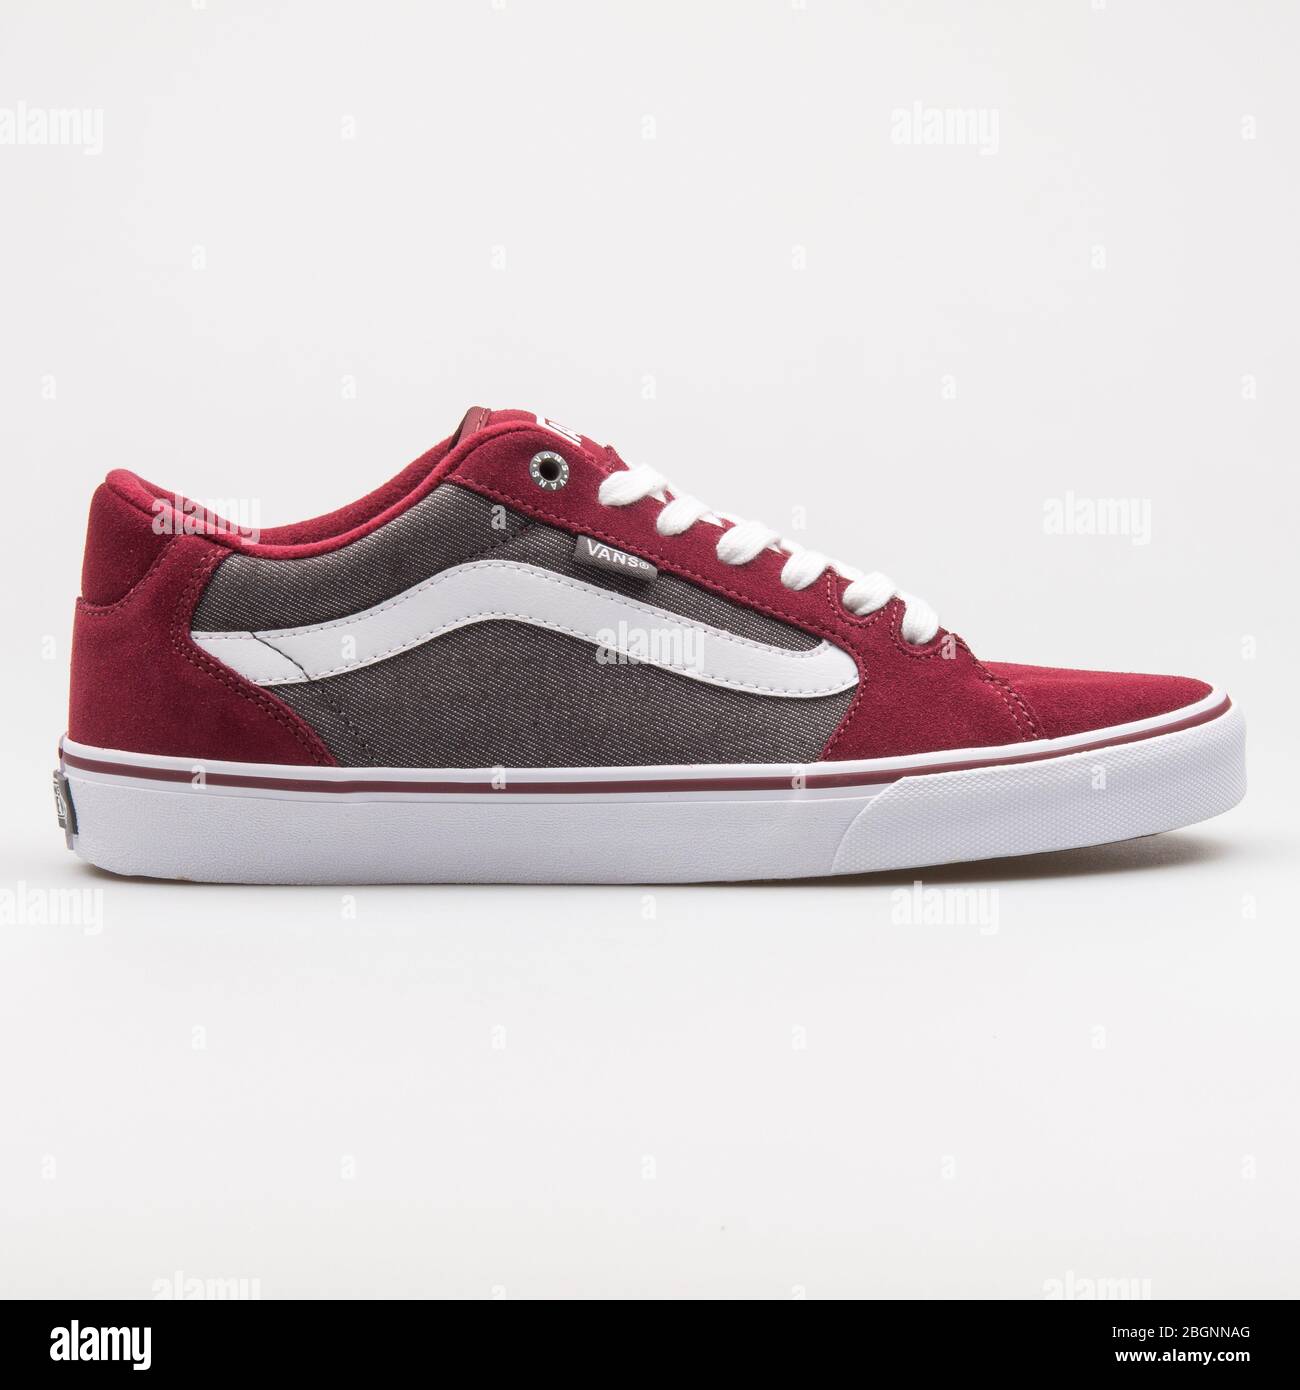 Red Vans Shoe High Resolution Stock Photography and Images - Alamy